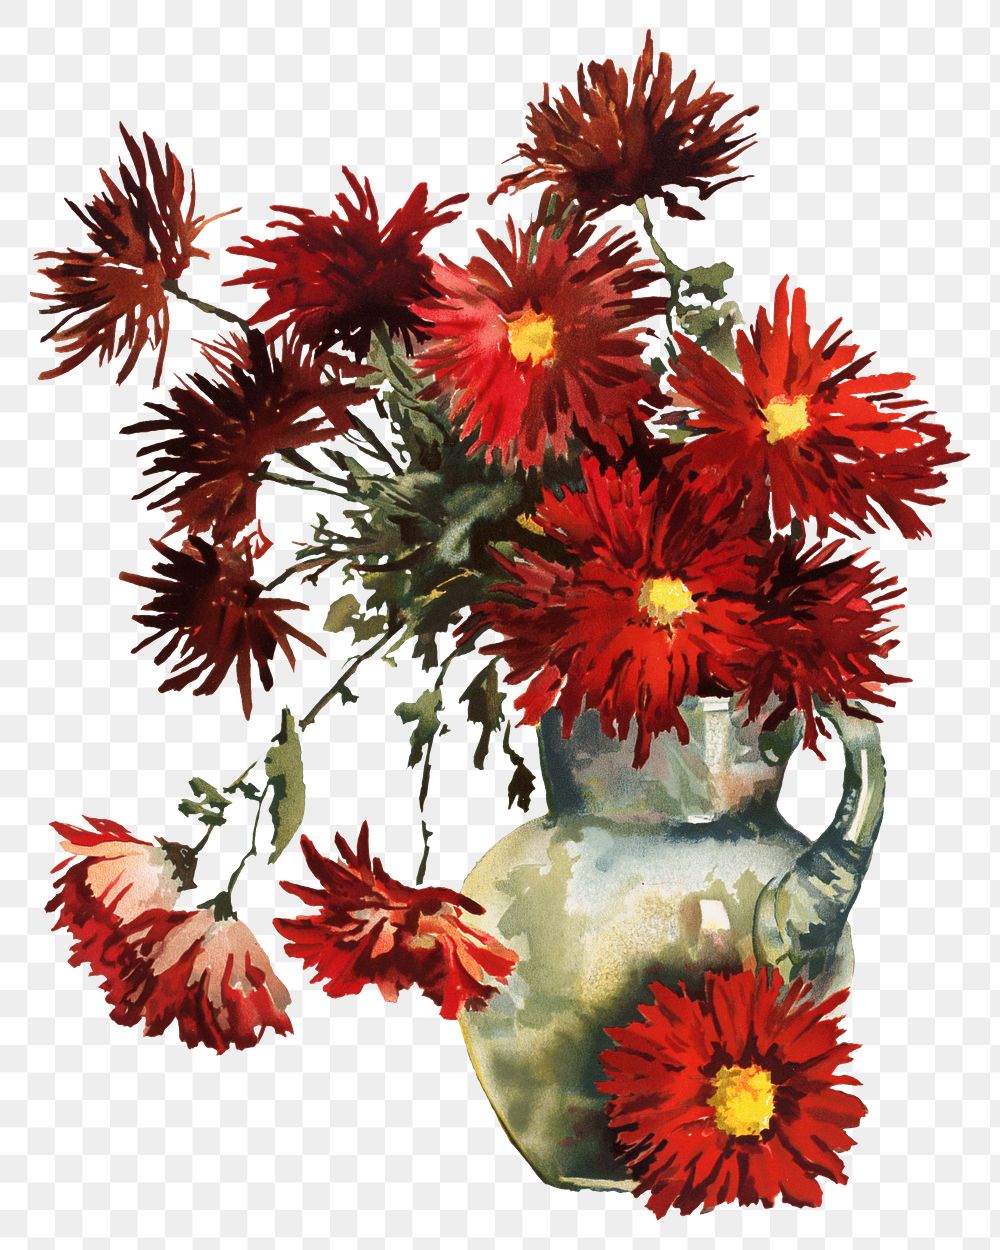 Chrysanthemums png, red flower vase illustration by Louise Blogett Field, transparent background. Remixed by rawpixel.